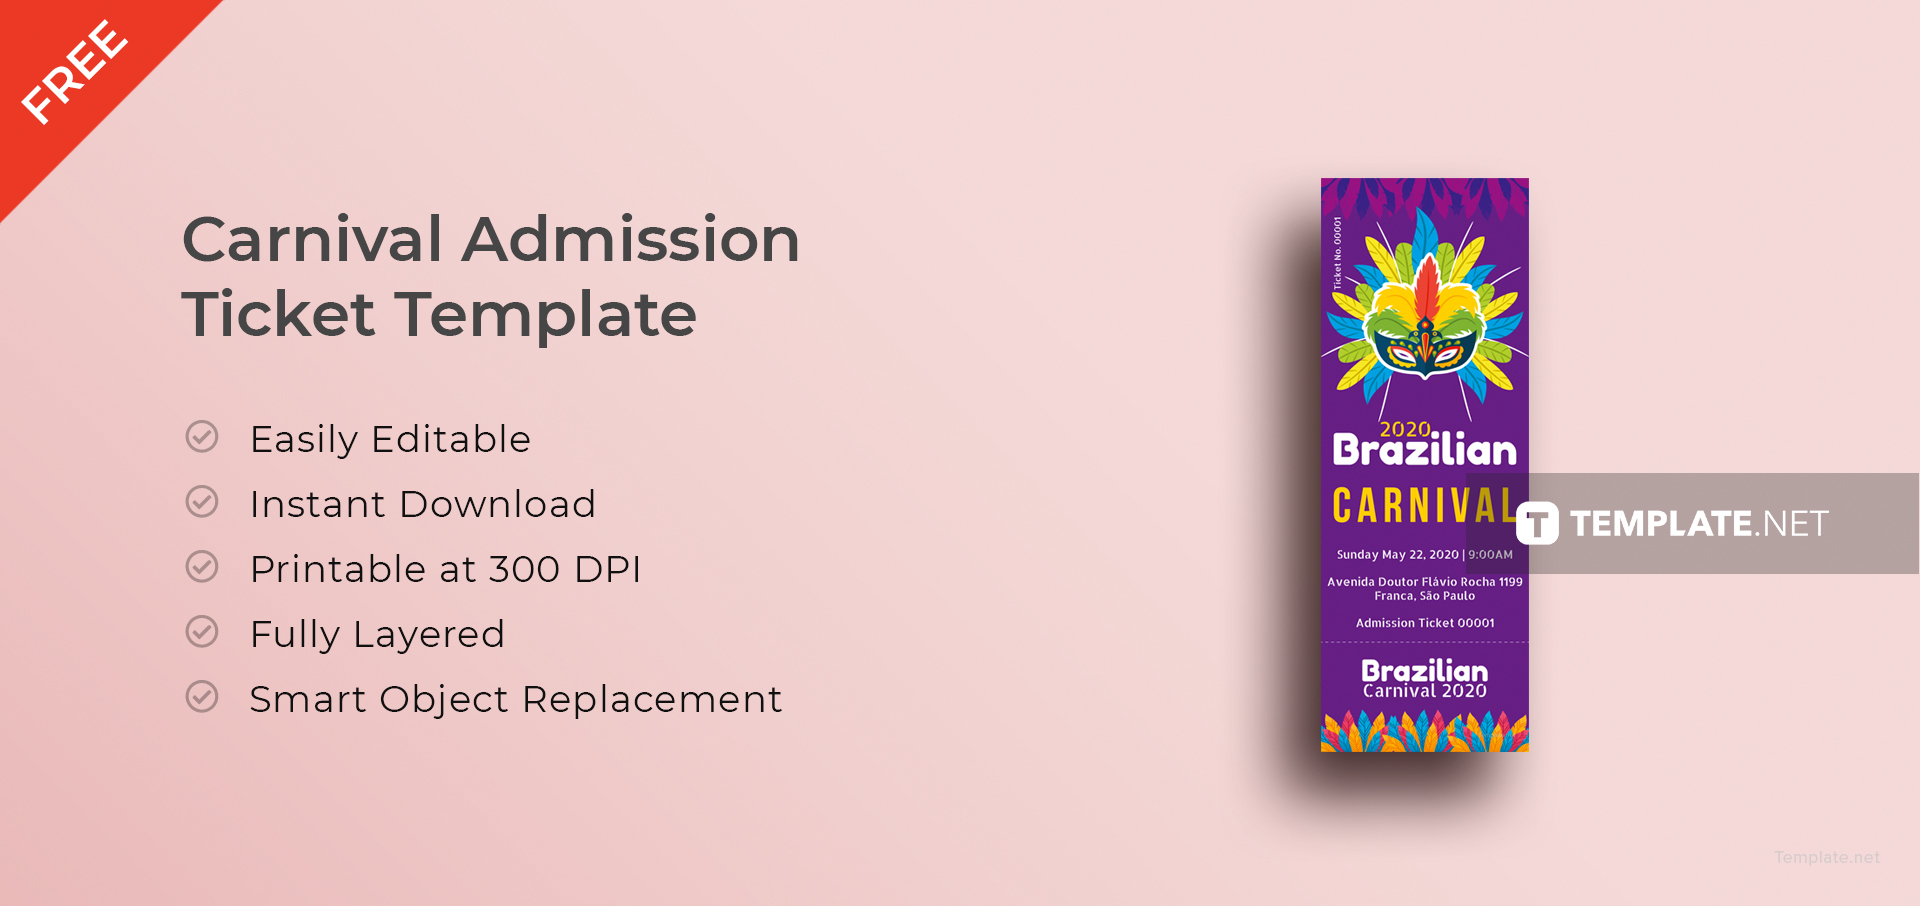 Free Carnival Admission Ticket Template in Adobe Microsoft